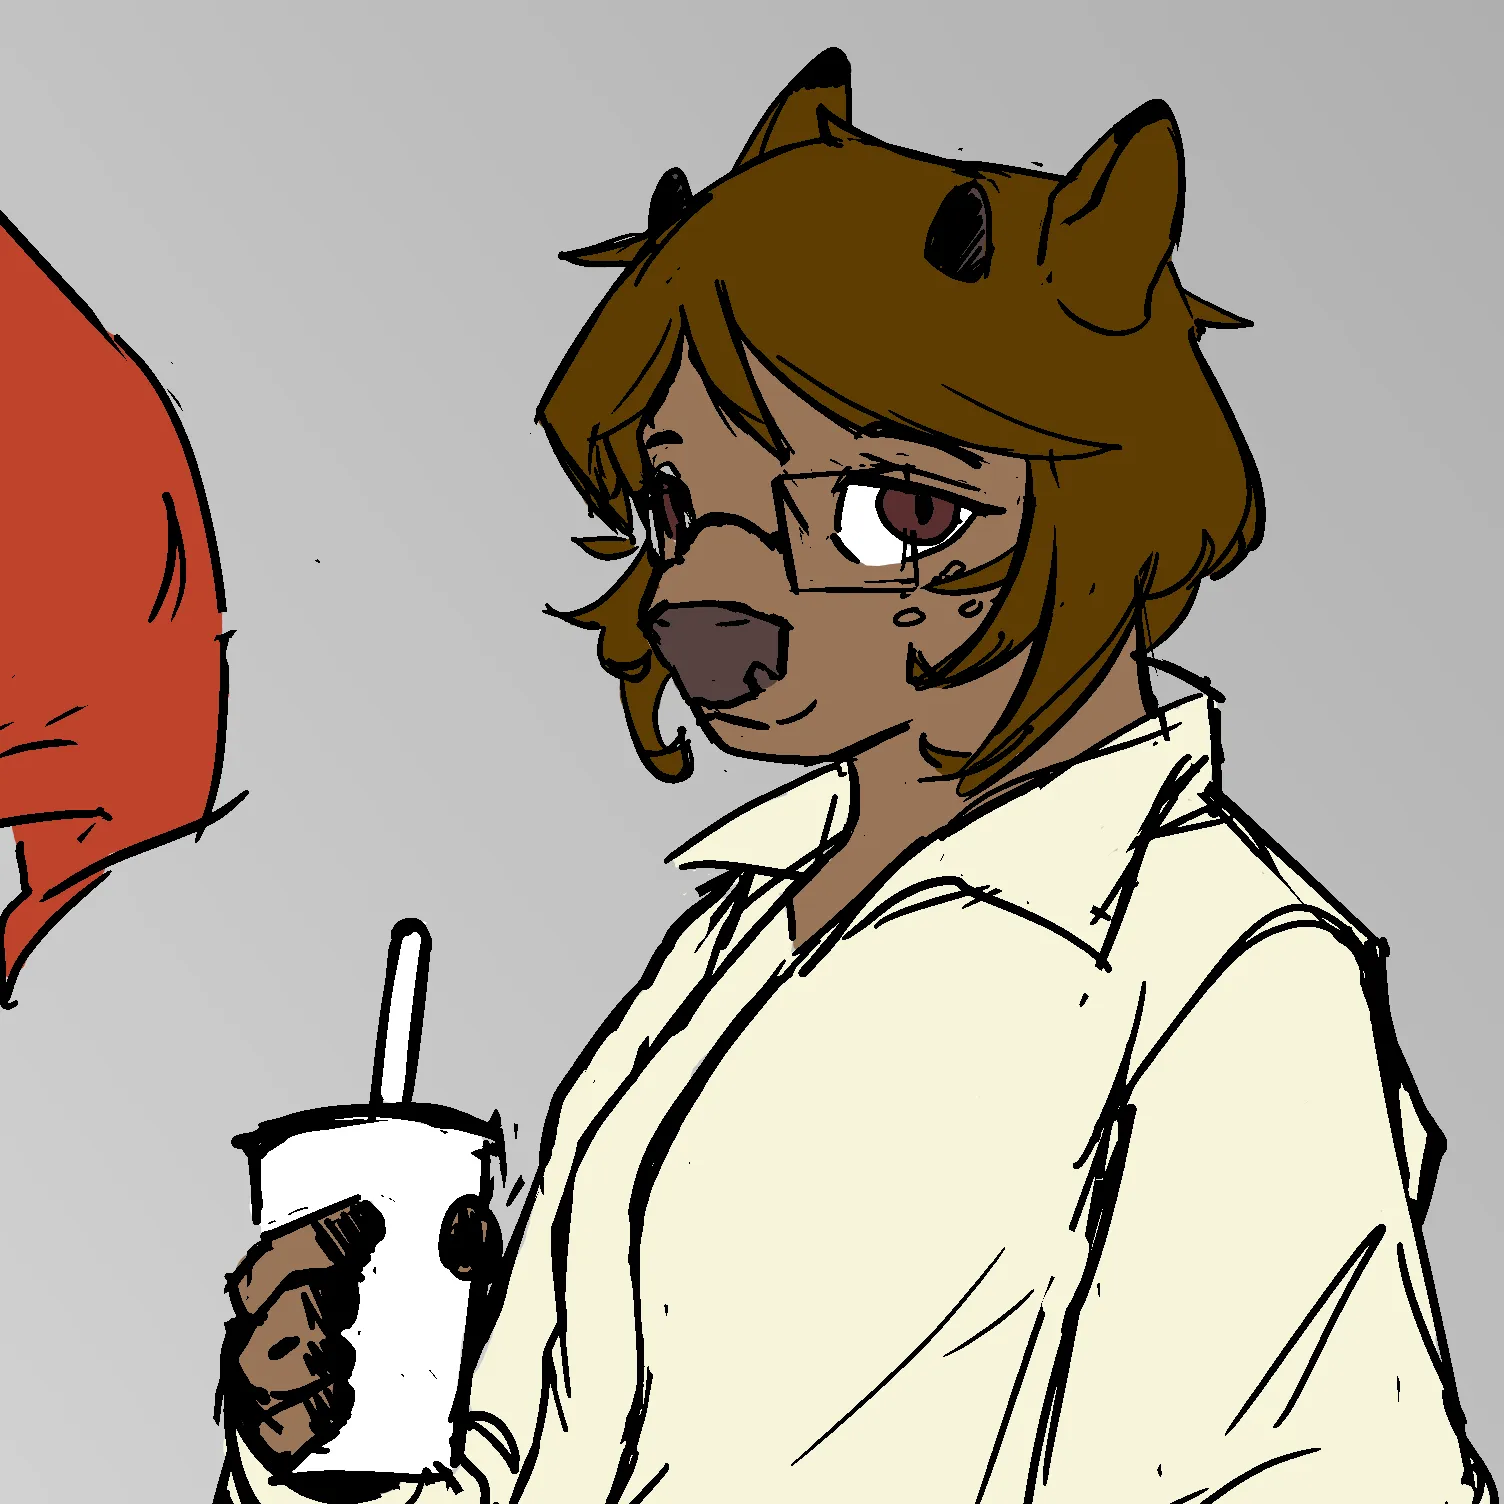 Image of a deer fursona in glasses and a white shirt. She has short, black horns.